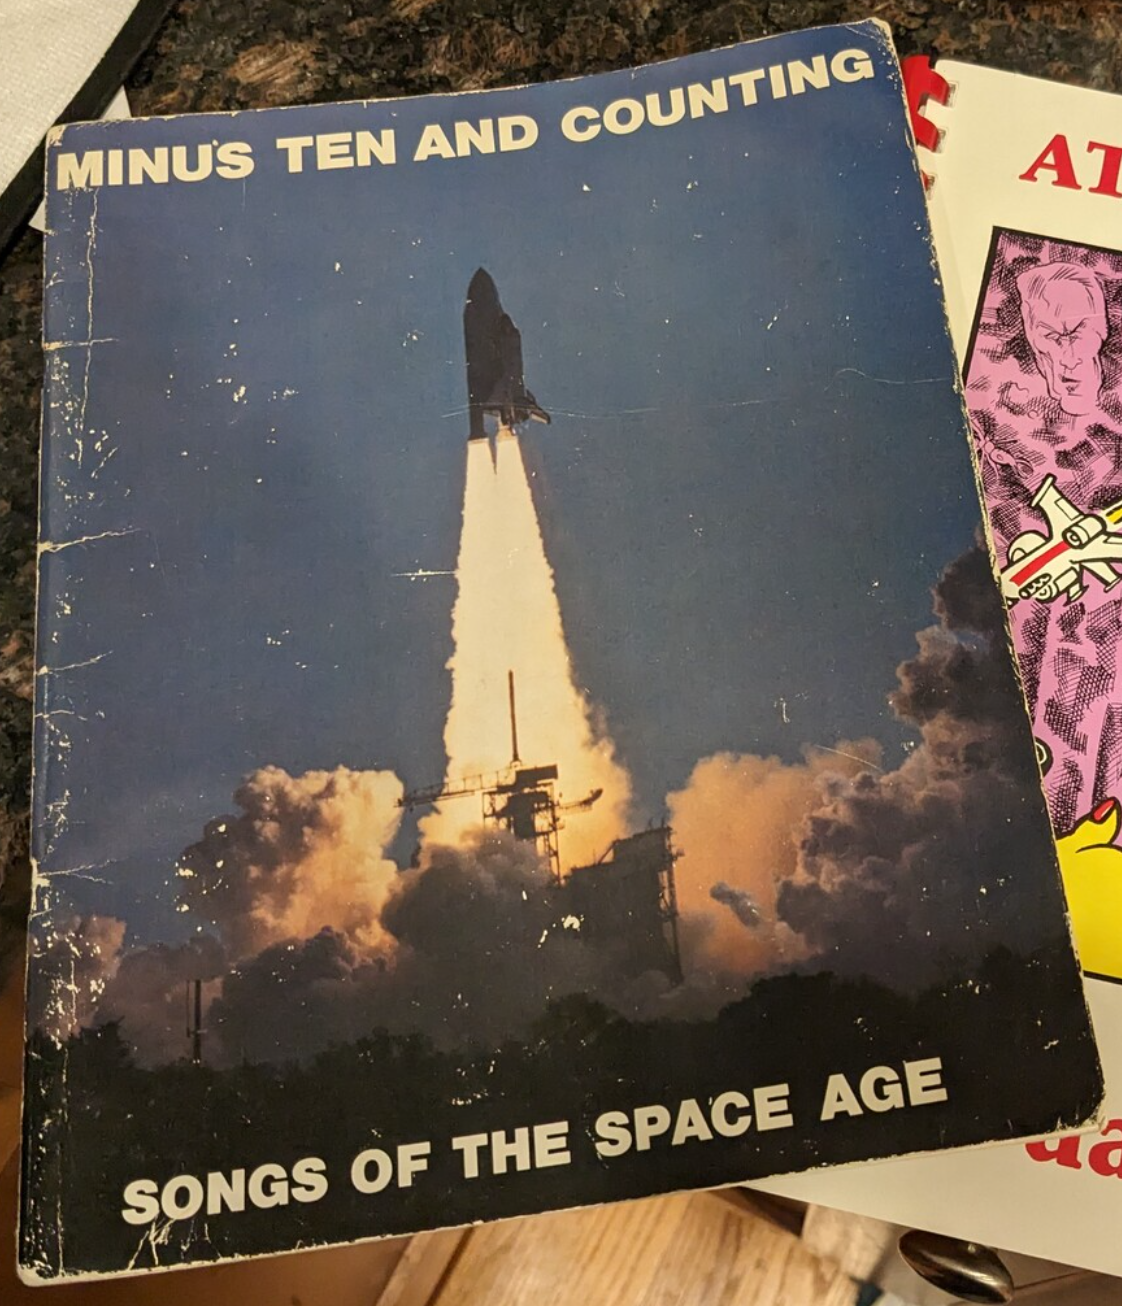 the Minus Ten and Counting: Songs of the Space Age songbook. It is
significantly boxed at the edges and bears a photograph of the Space Shuttle
taking off, sans megagantry.